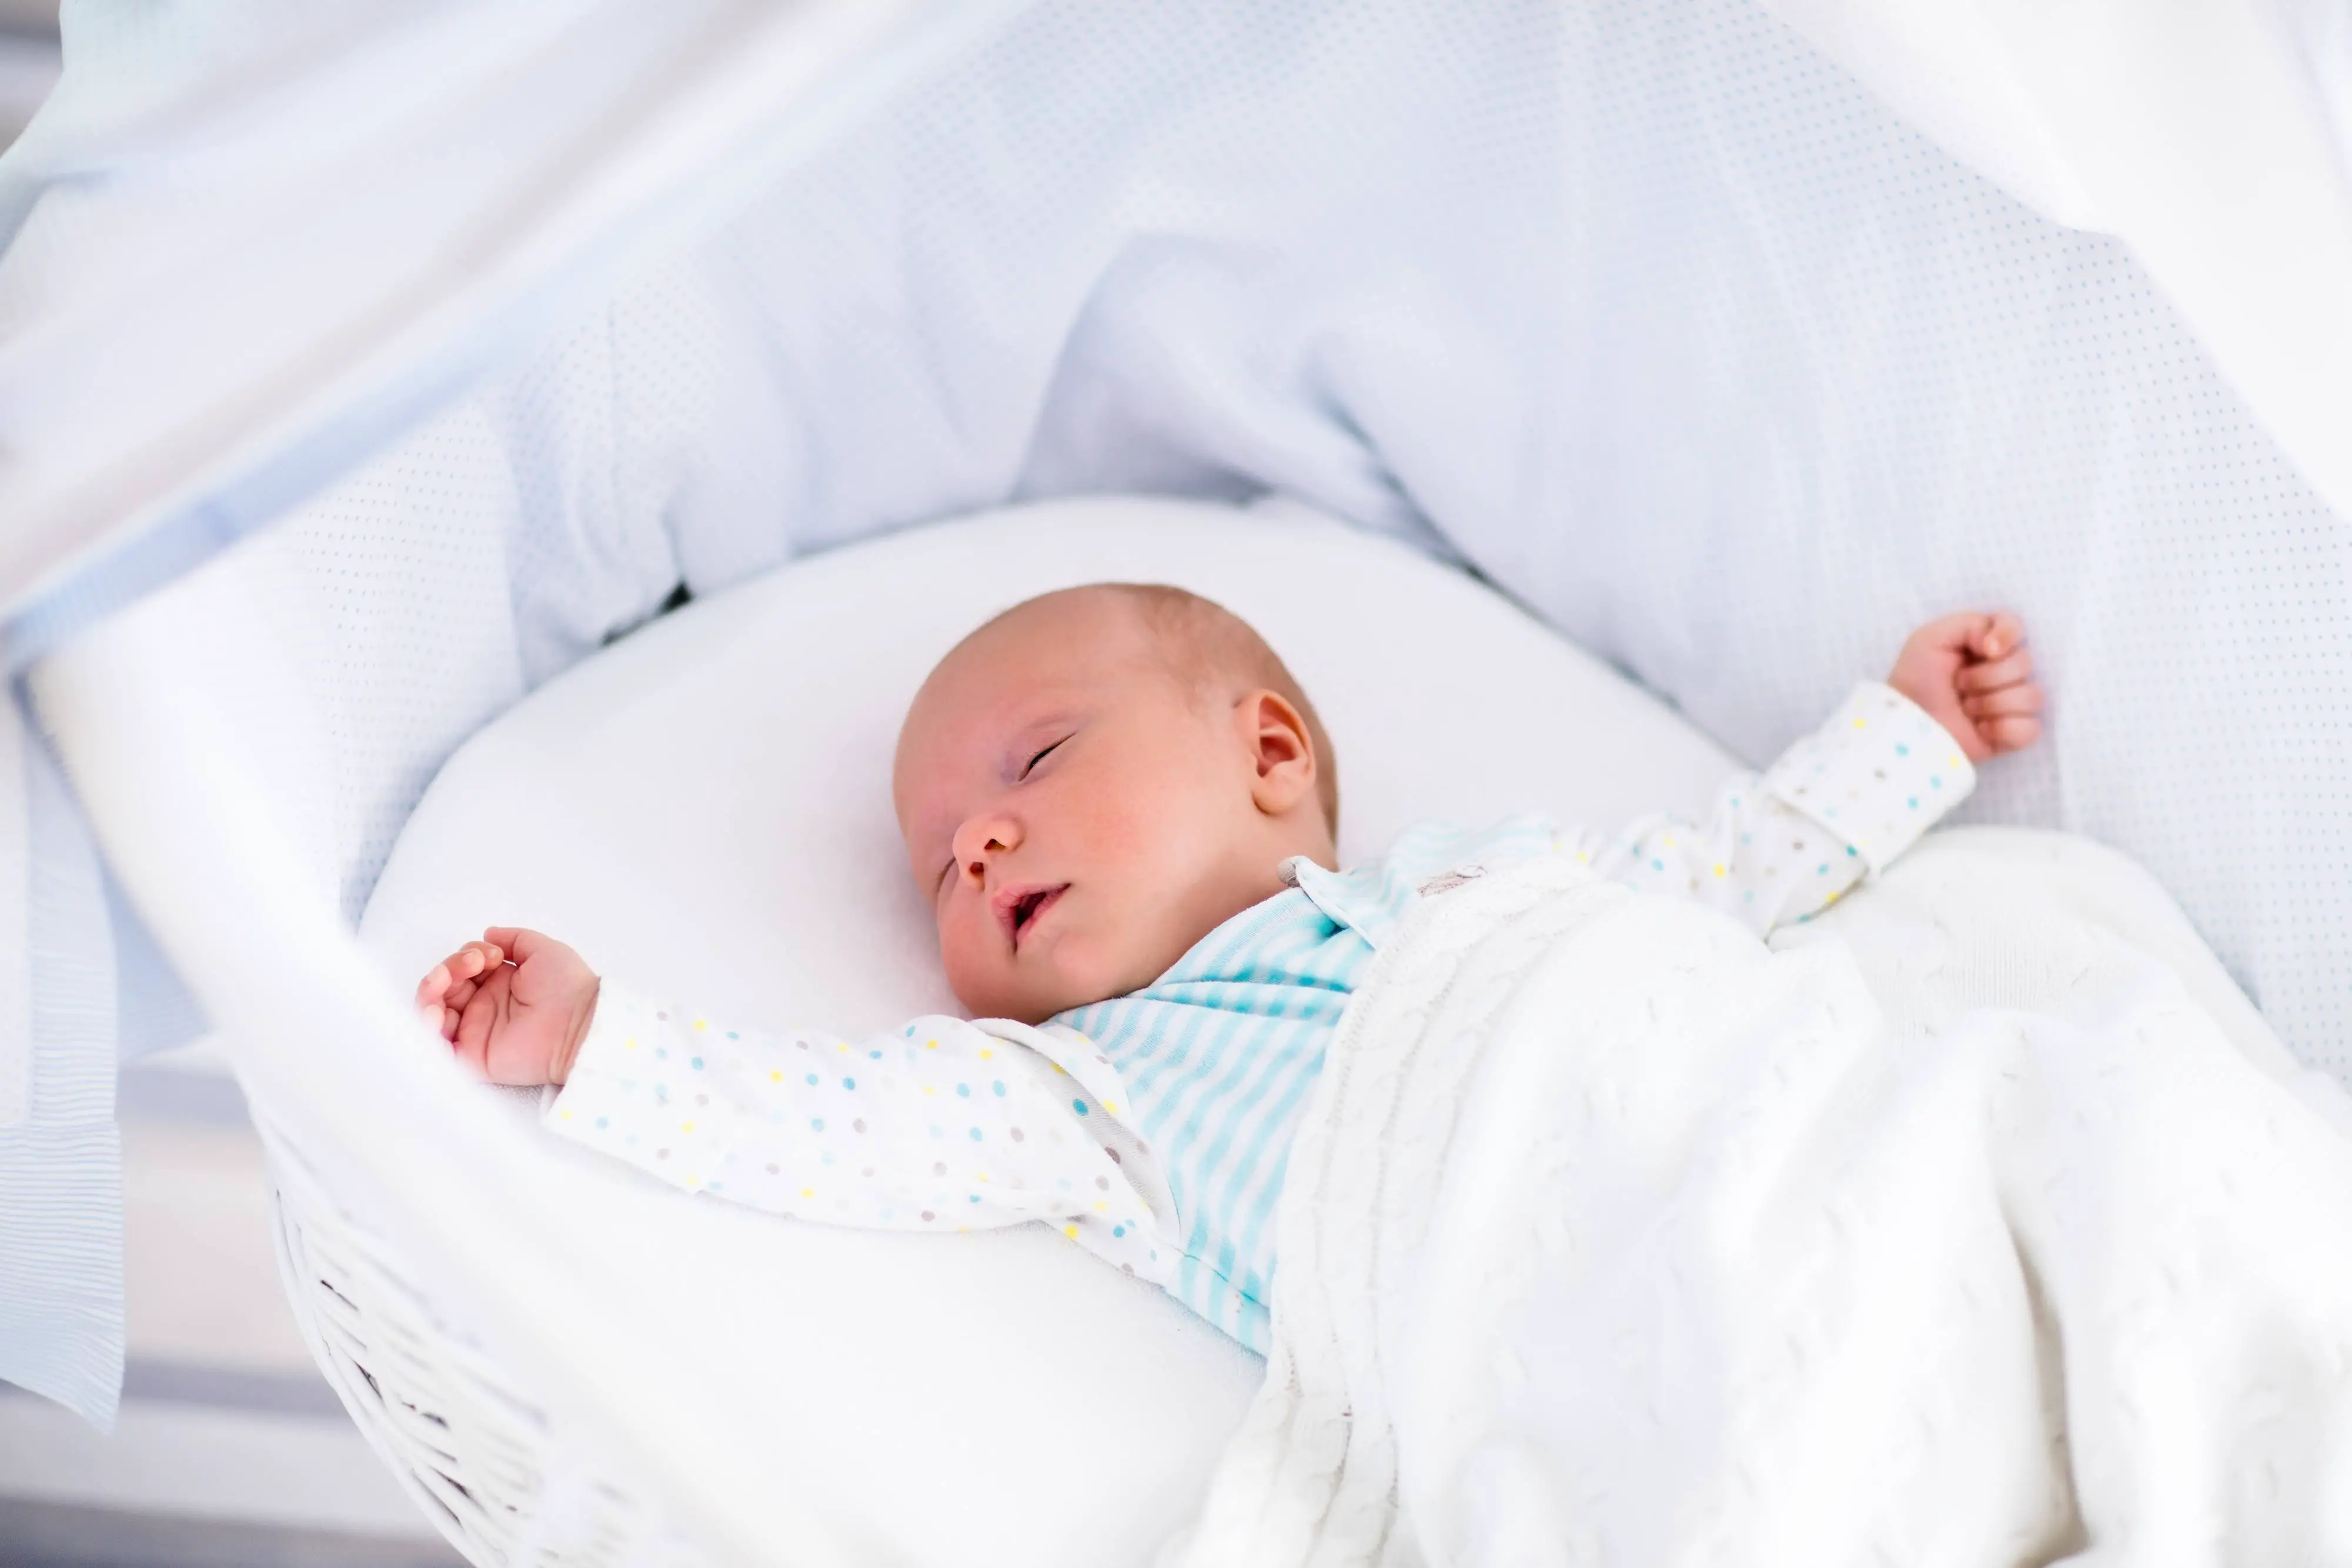 How To Get Your Baby to Sleep In A Bassinet?